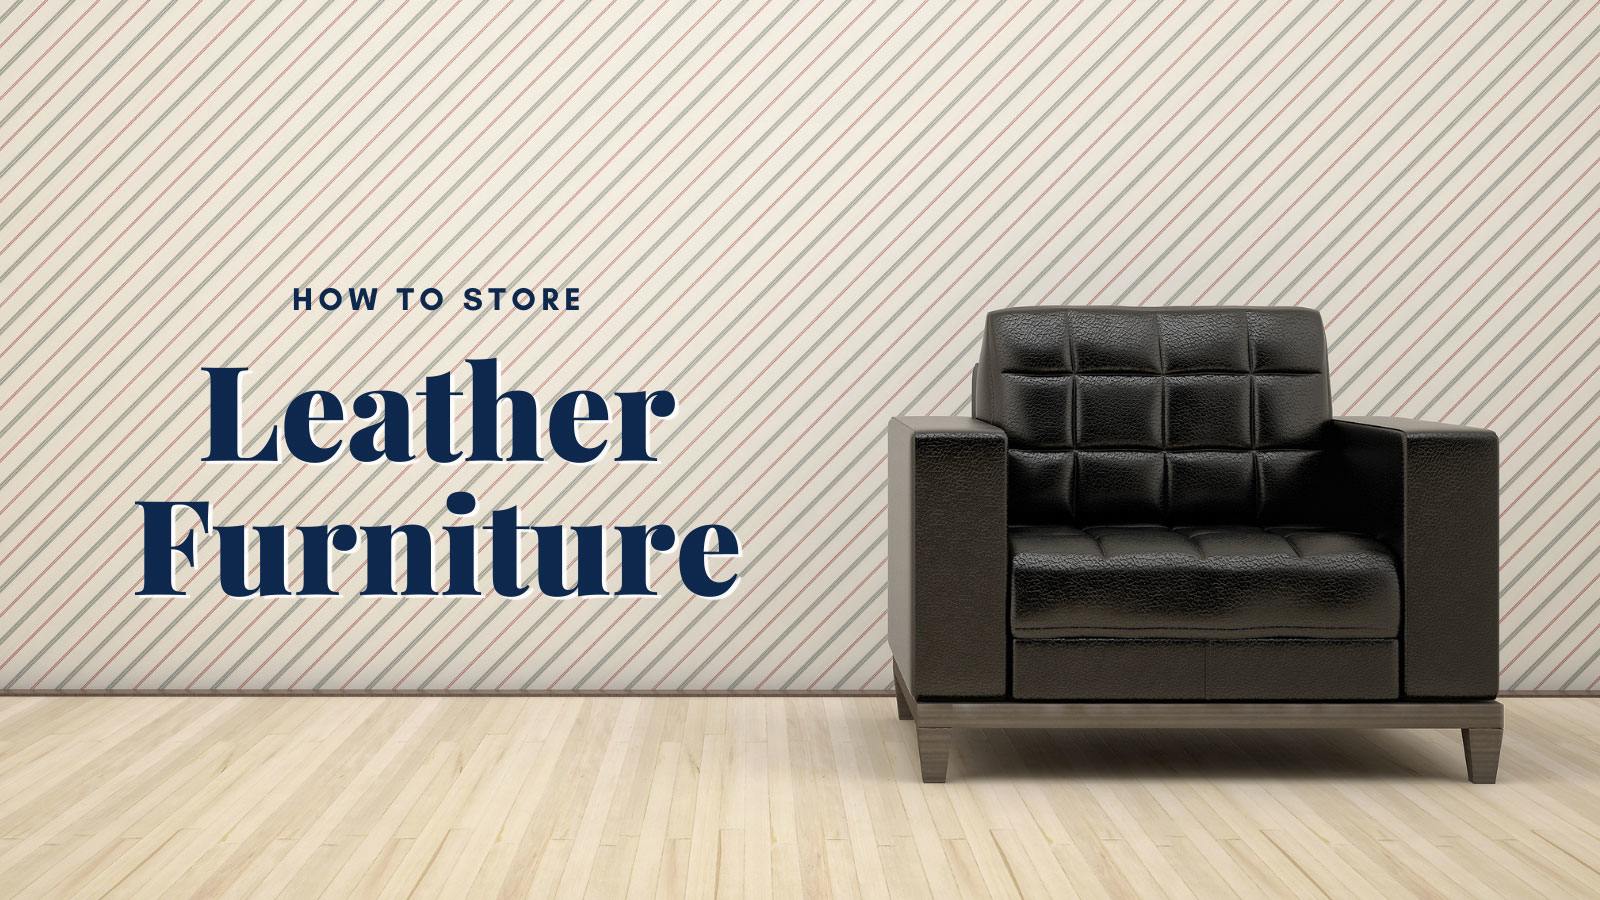 How to Store Leather Furniture2 | How to Store Leather Furniture in a Storage Unit | Amazing Spaces Storage Centers